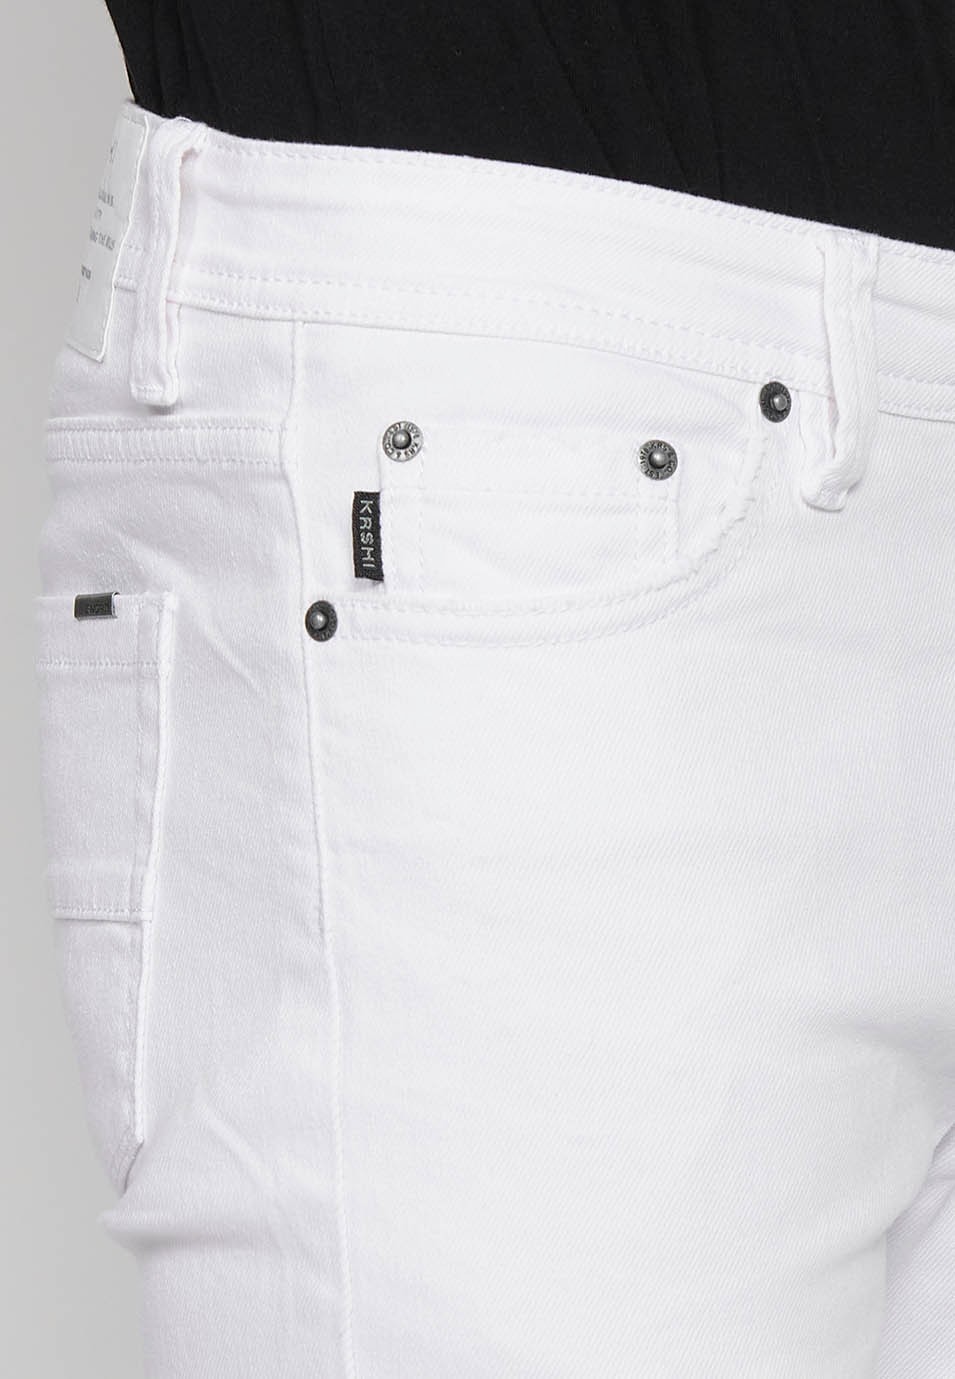 Super skinny jeans with front closure with zipper and button in White Denim for Men 4